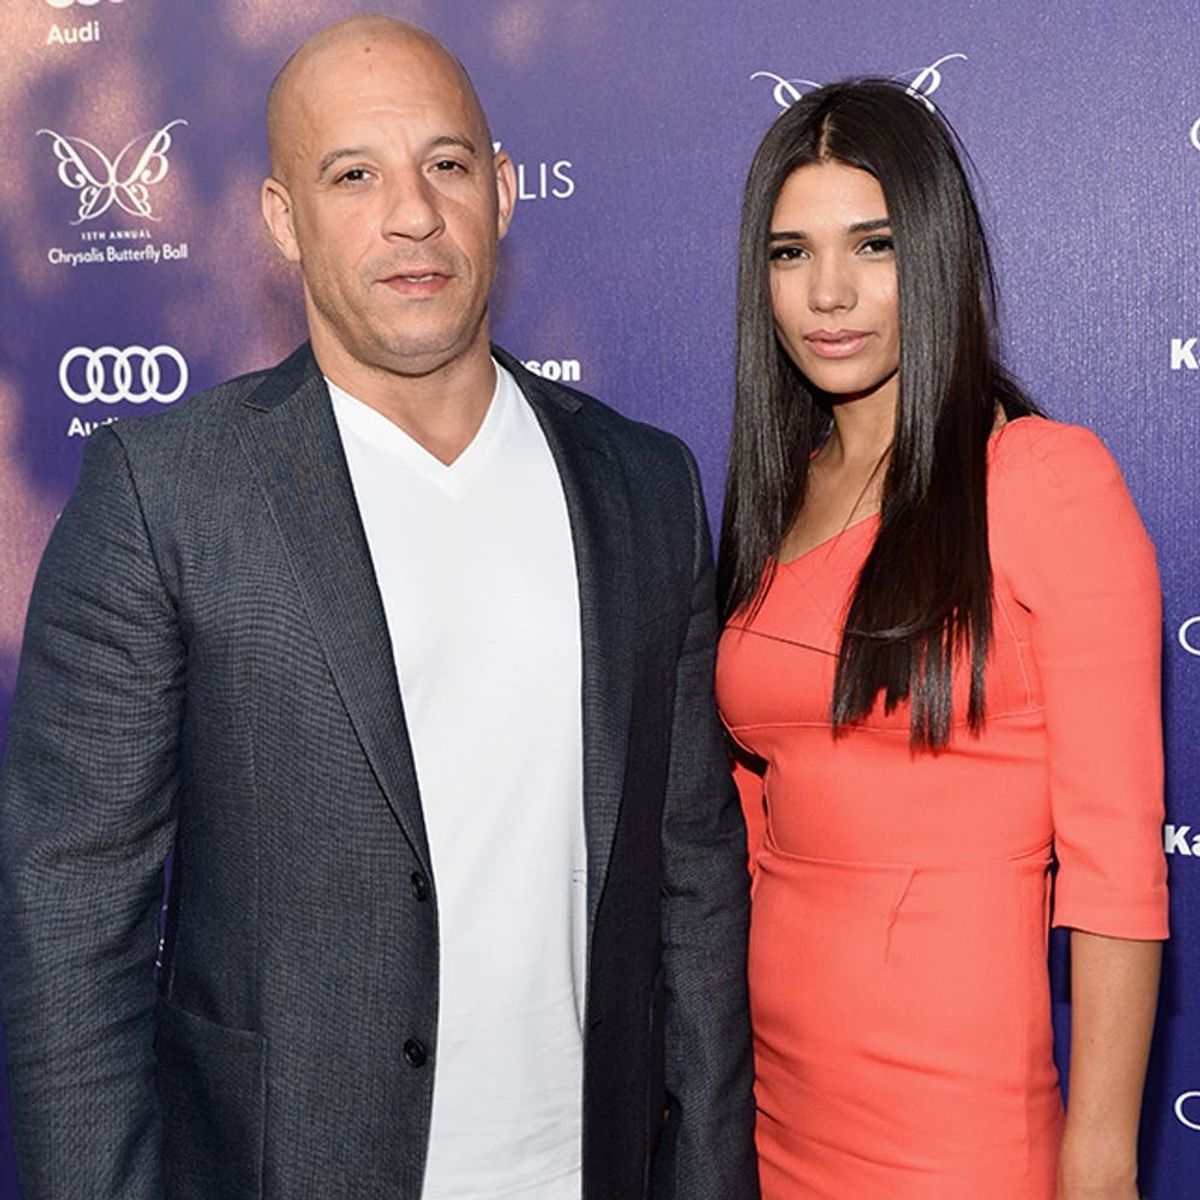 Vin Diesel Is Starting the Most Touching Baby Name Trend Yet